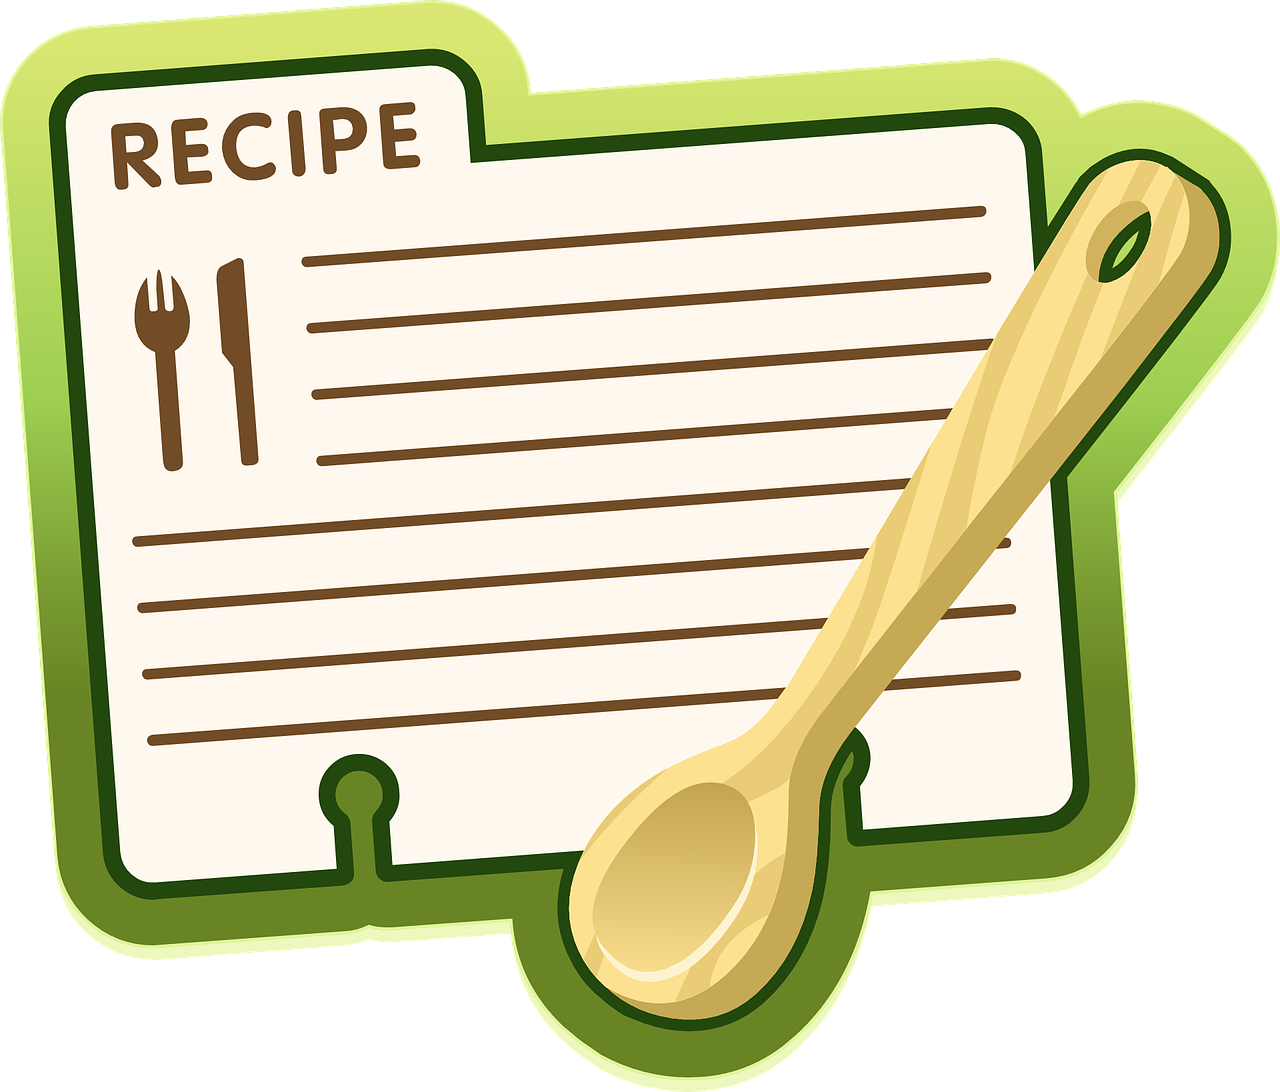 An image of a blank recipe card depicting the ingredients recommended for great online learning.